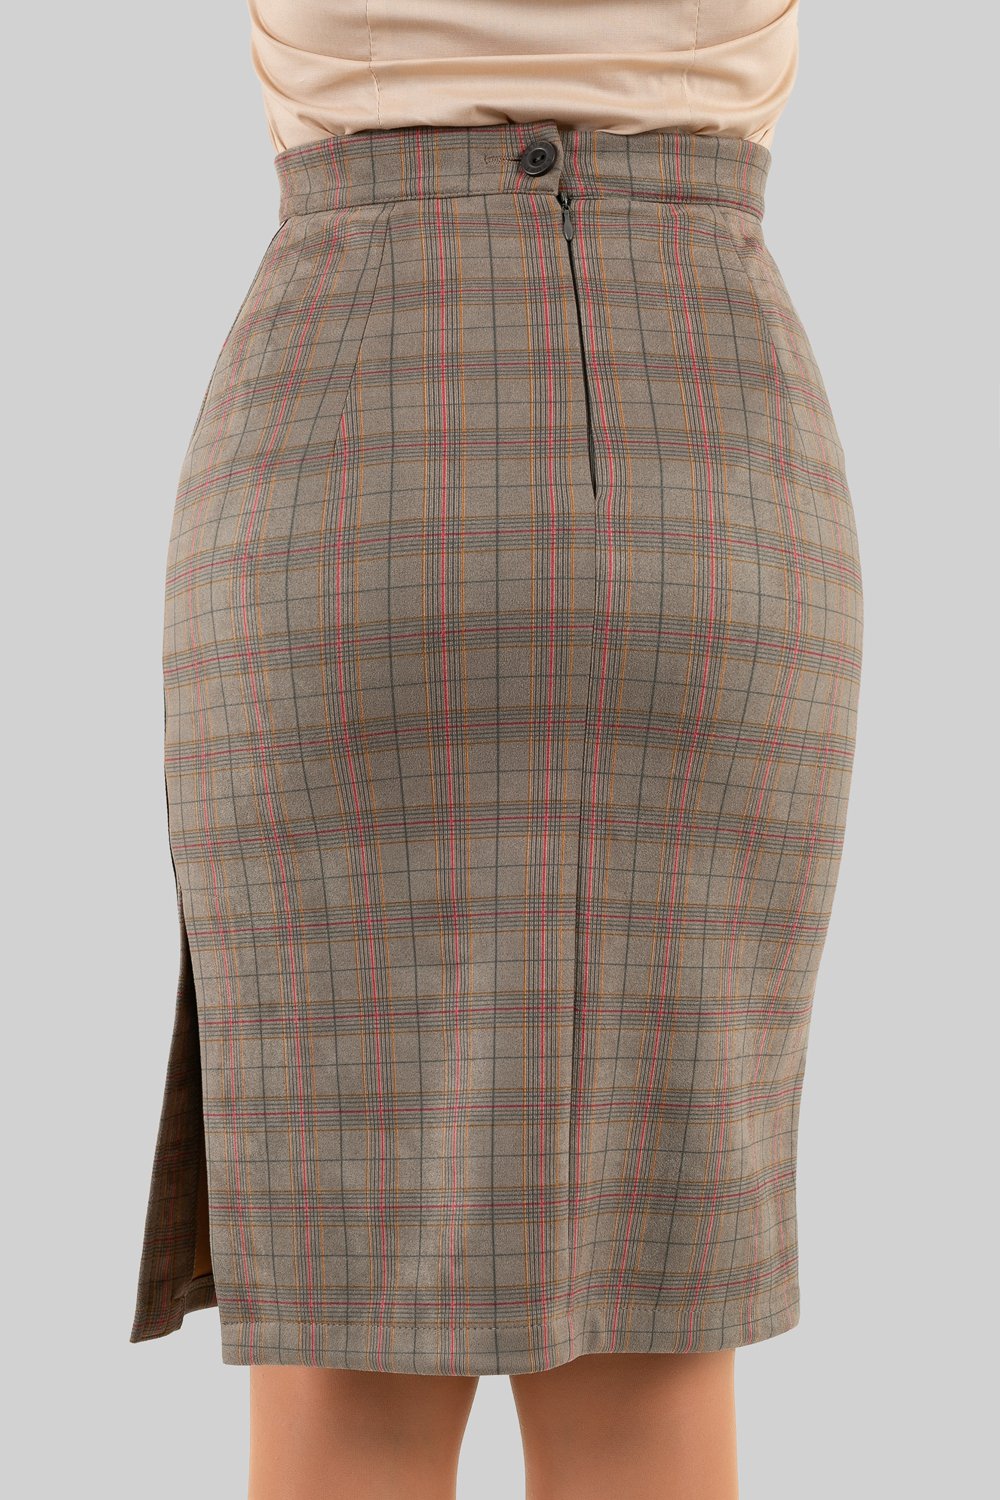 Pencil skirt in plaid in grey